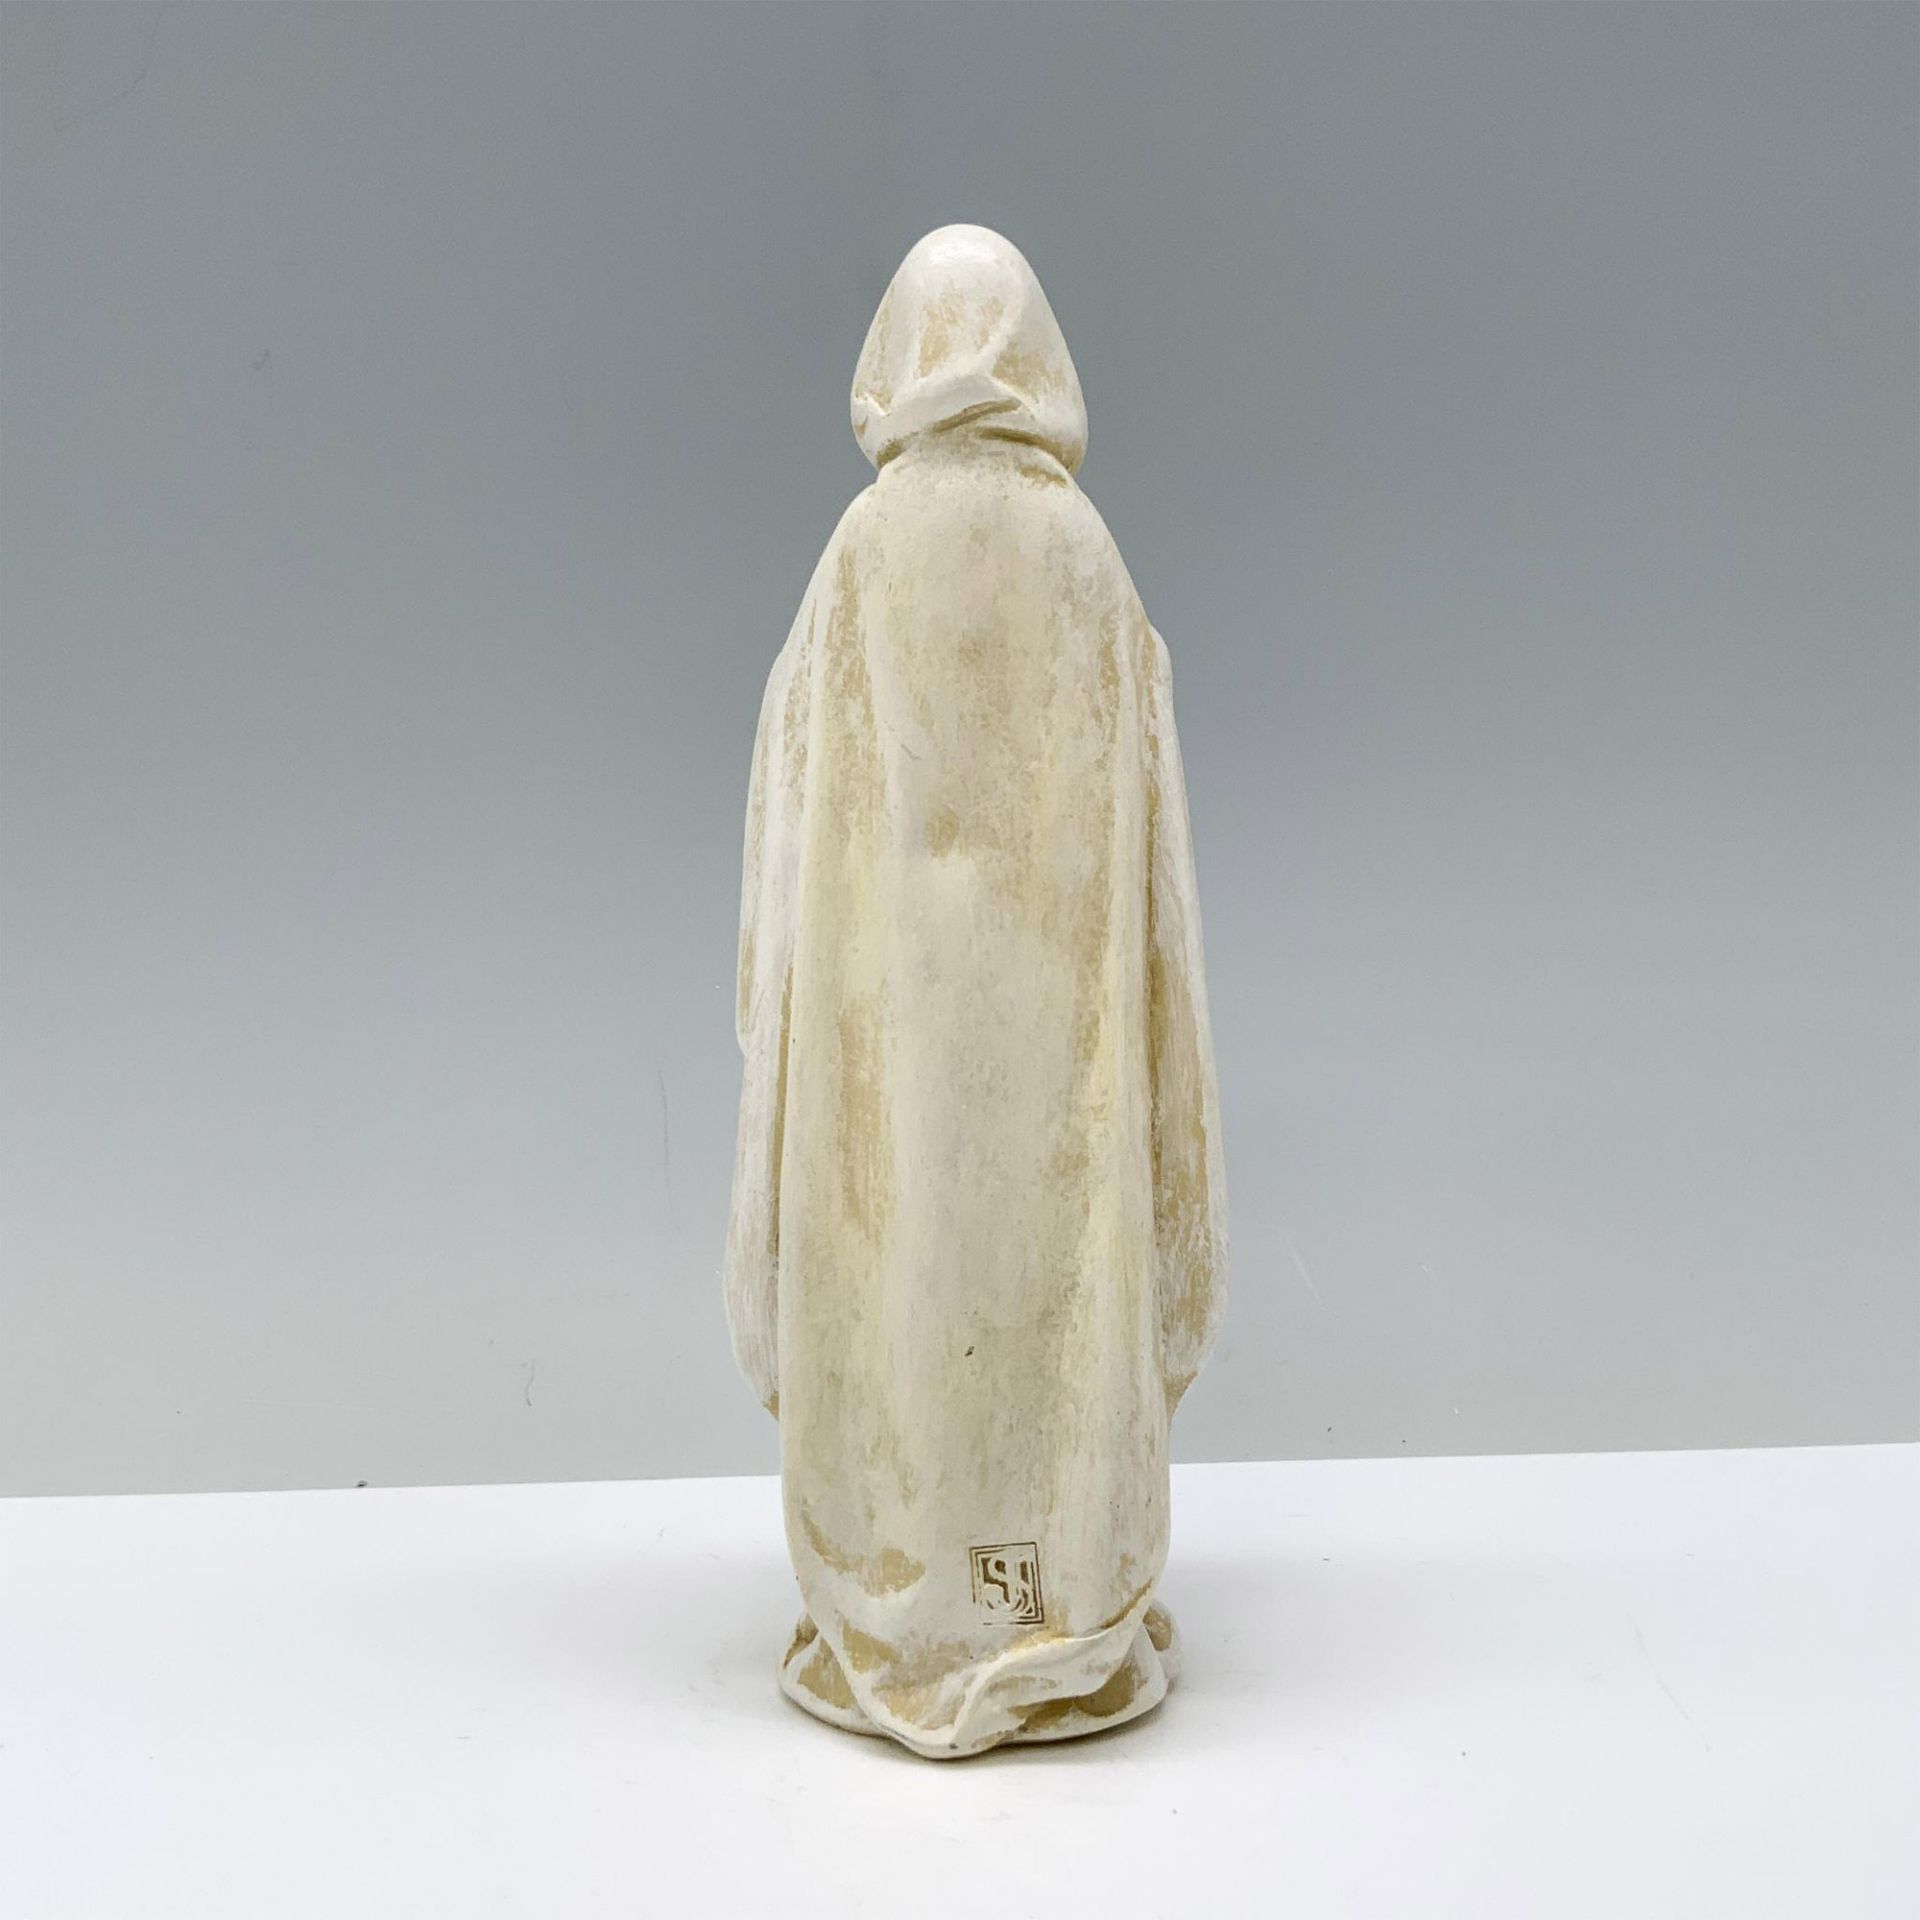 Virgin Mary Lady of Lourdes Figurine - Image 2 of 3